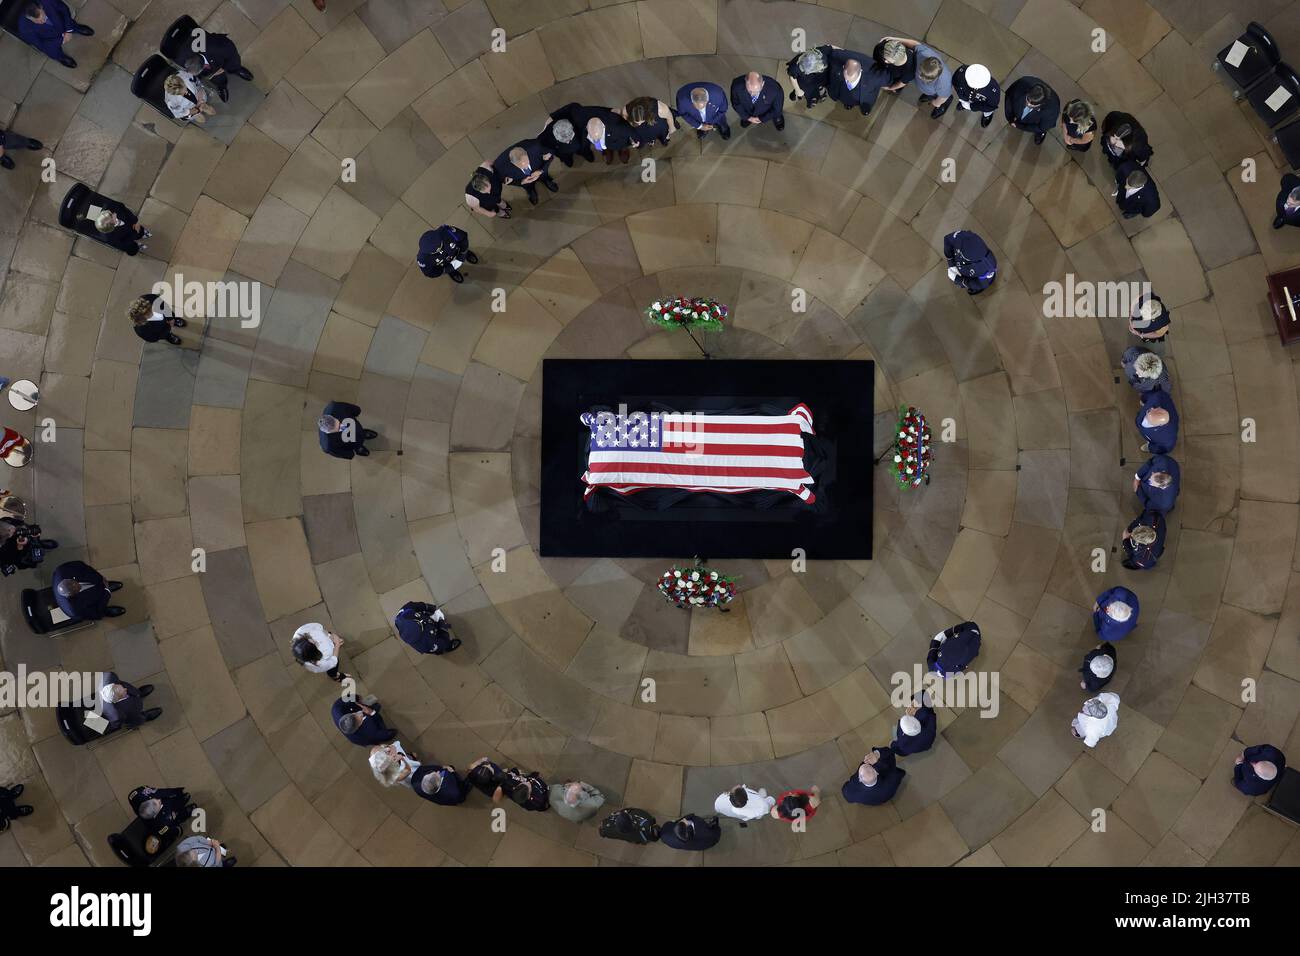 Washington, DC, USA. 14th July, 2022. Family members stand in a circle around Herschel "Woody" Williams' flag-draped casket in the United States Capitol Rotunda where he lays in honor on July 14, 2022 in Washington, DC. The last living WWII combat veteran to have received the Medal of Honor, Williams was a Marine corporal during the Battle of Iwo Jima in 1945 when he used his flamethrower to destroy numerous enemy pillboxes while under intense incoming fire for more than four hours. Credit: Chip Somodevilla/Pool Via Cnp/Media Punch/Alamy Live News Stock Photo